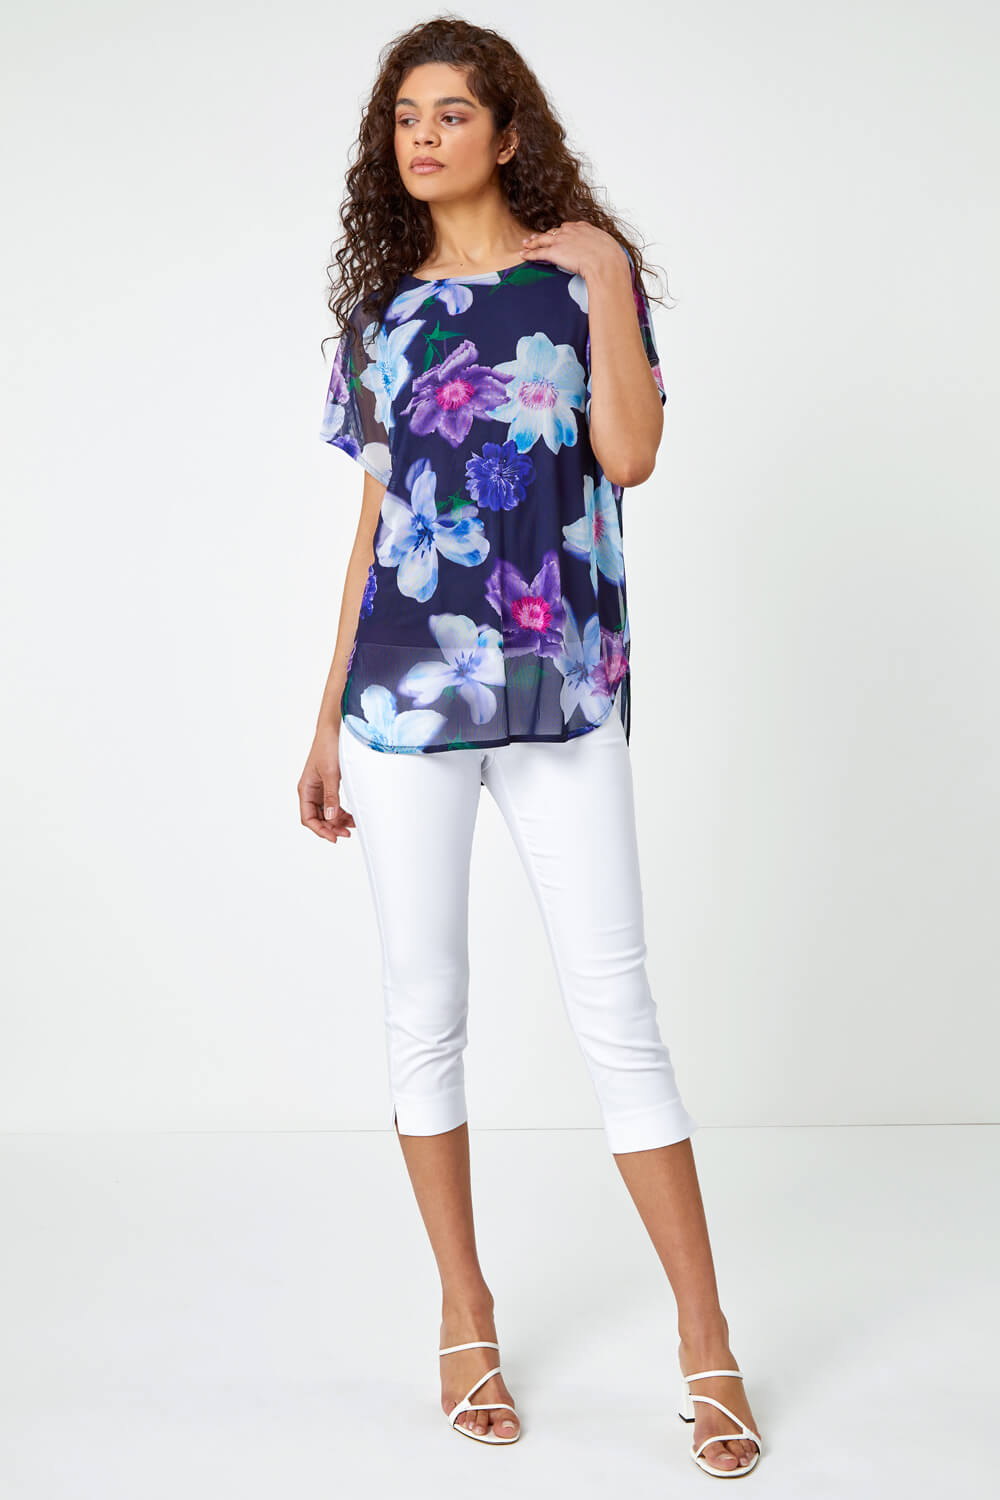 Navy  Floral Print Mesh Overlay Top, Image 2 of 5